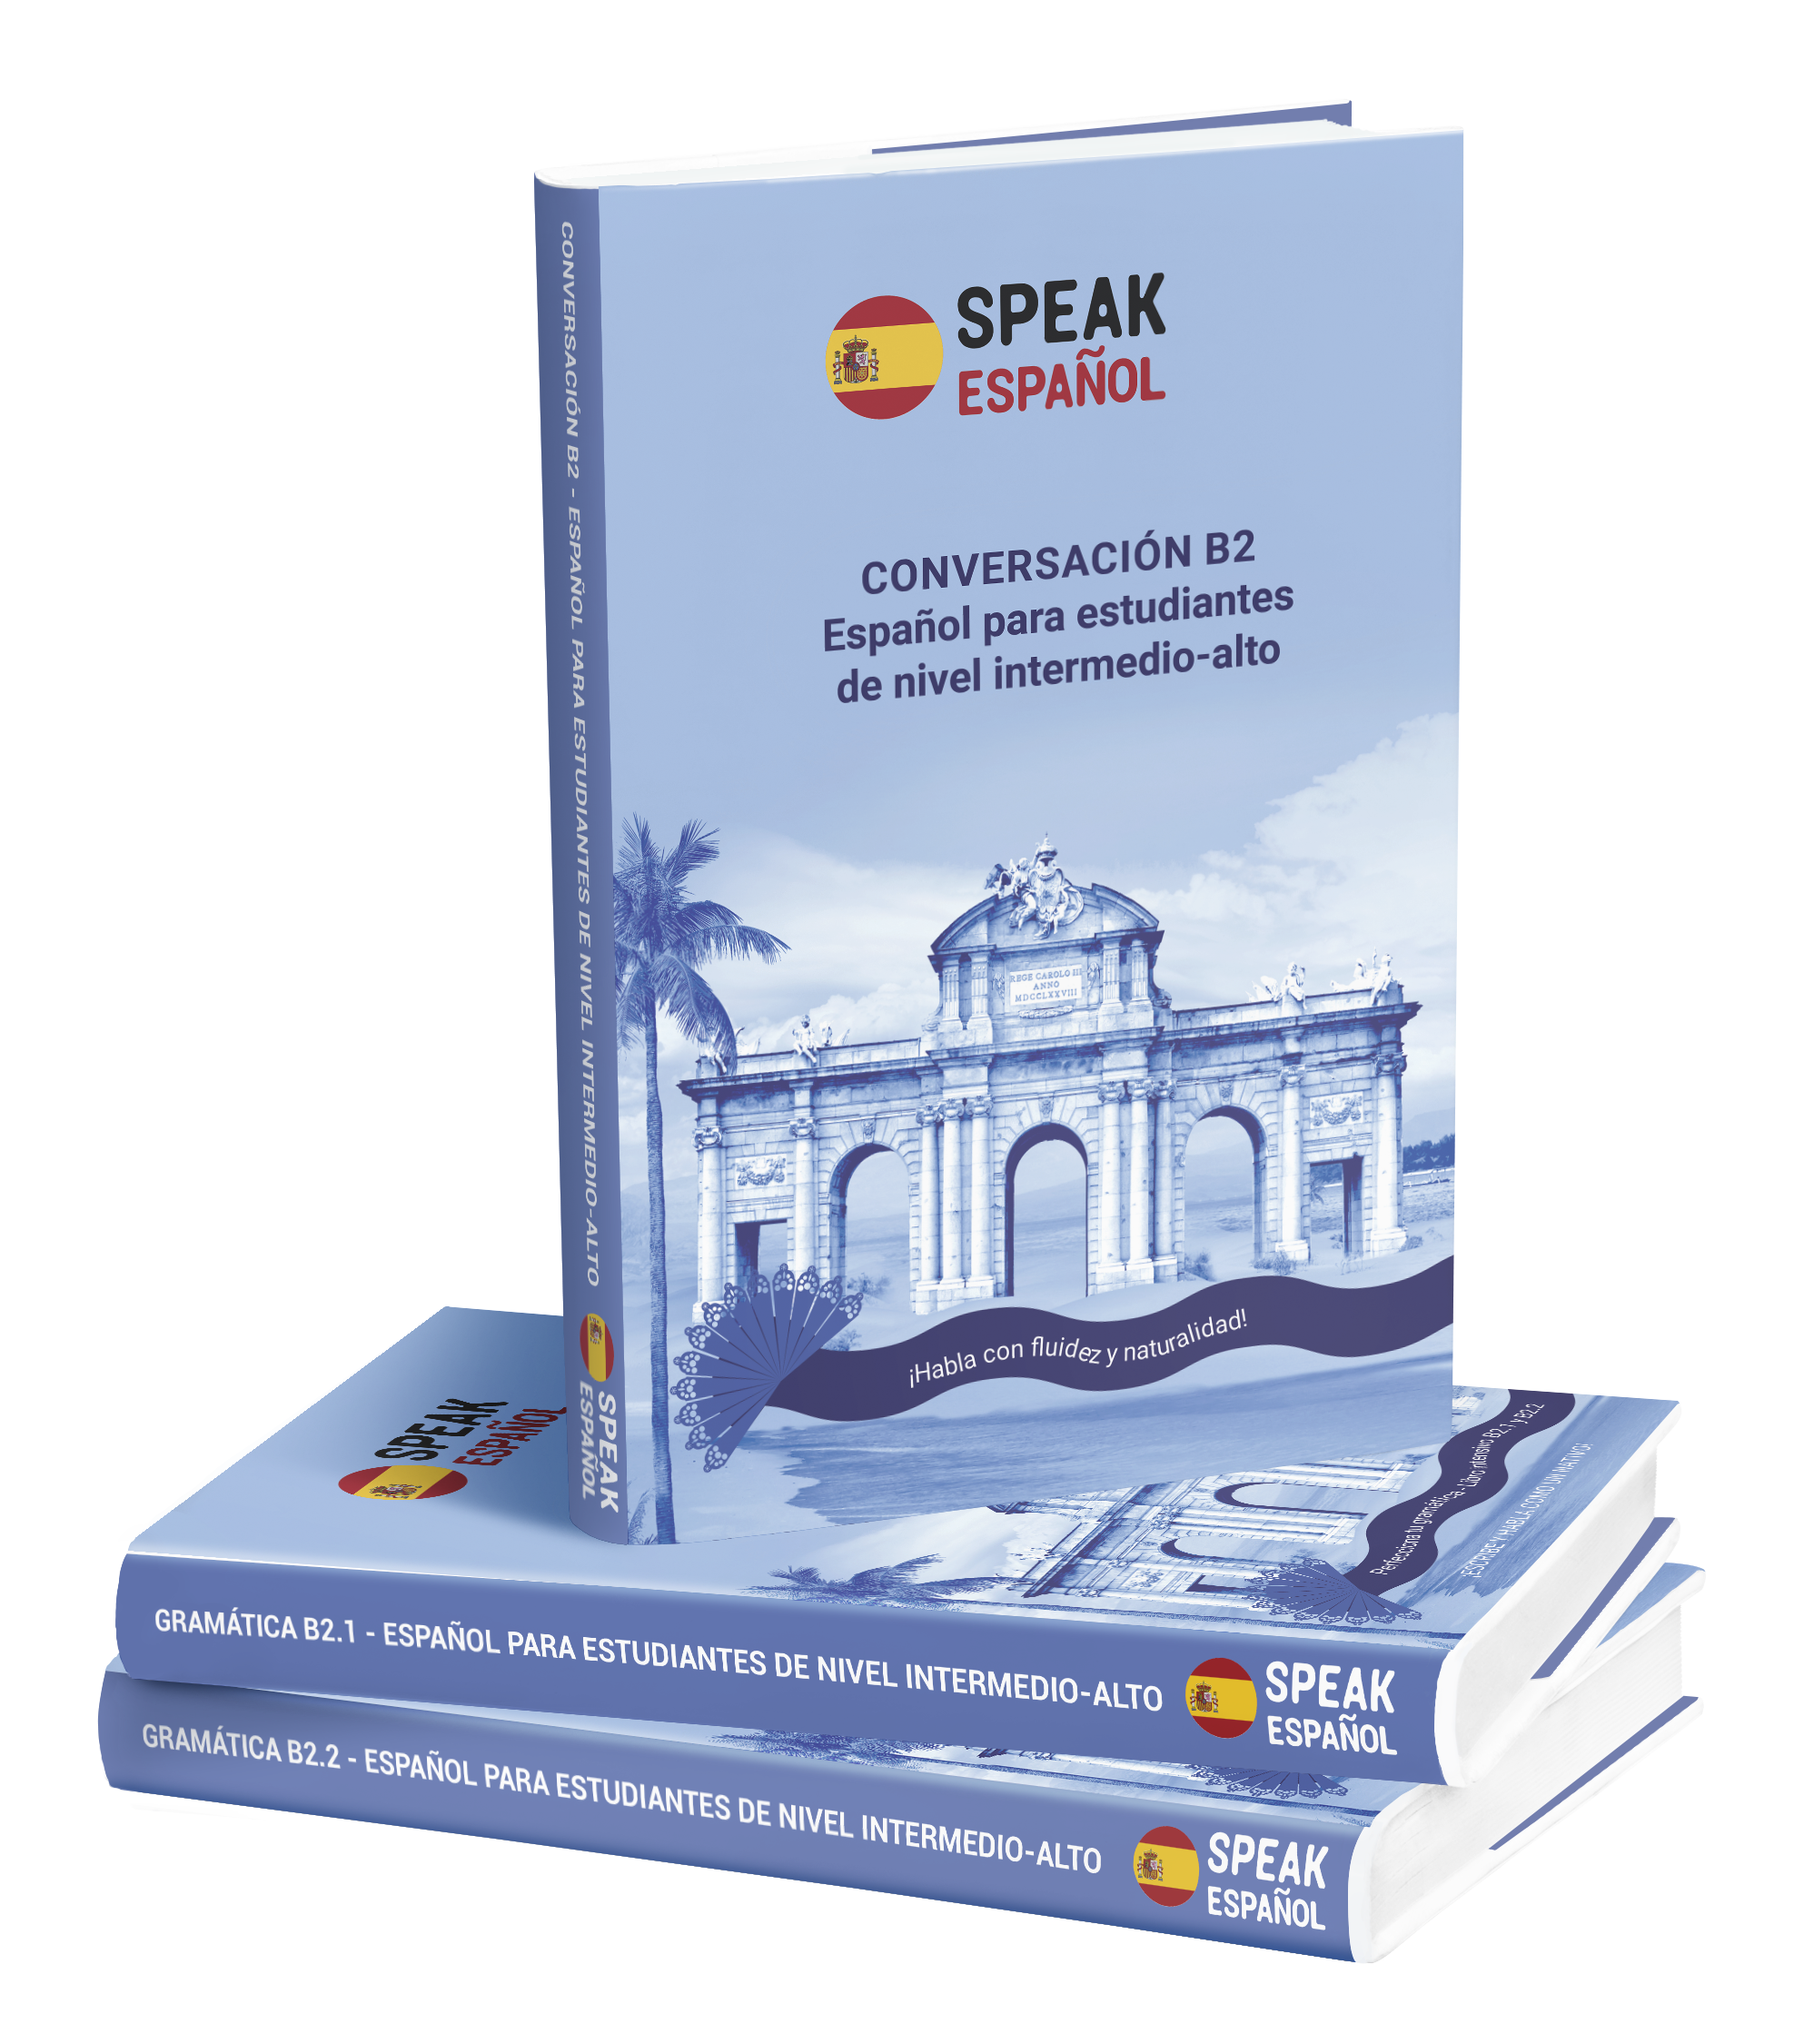 B2 level Spanish books and intensive course